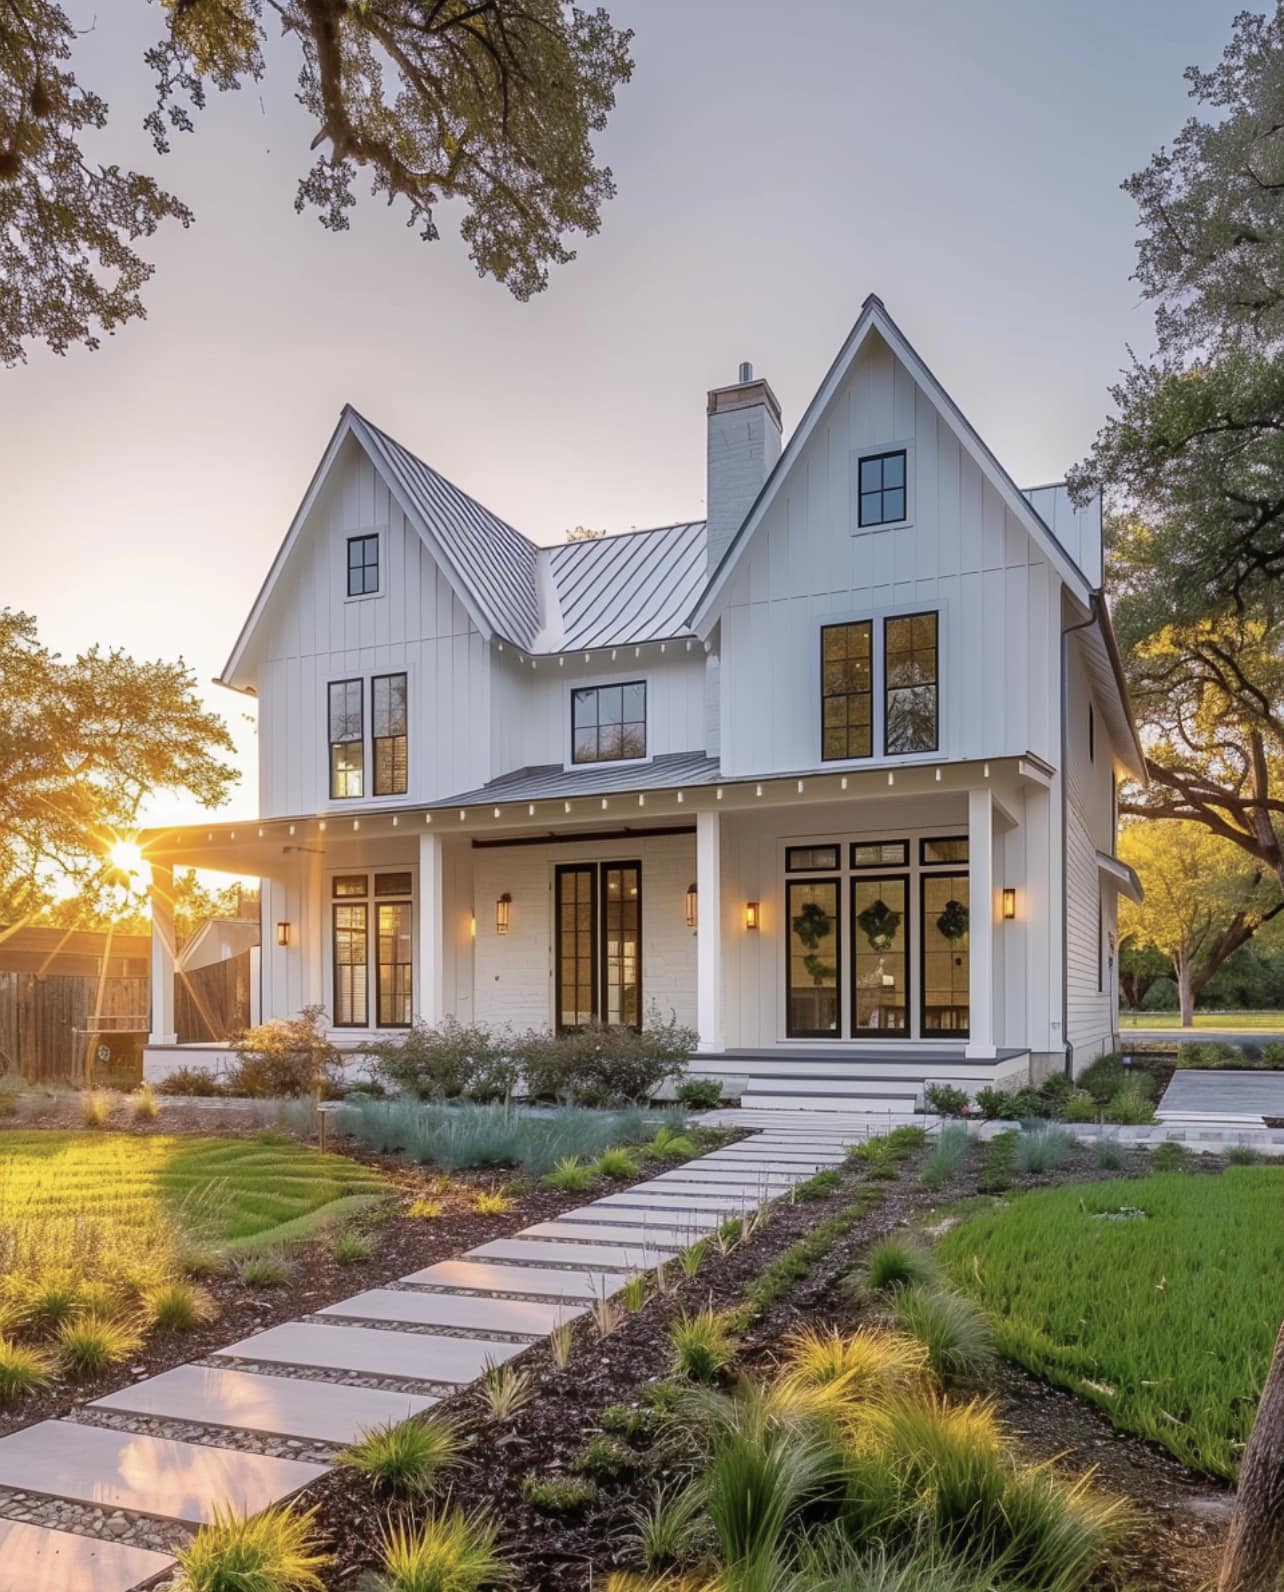 Here are 20 stunning house exteriors that'll inspire your next big home project or simply feed your daydreams! From sleek modern designs to charming classics, there's something for everyone!